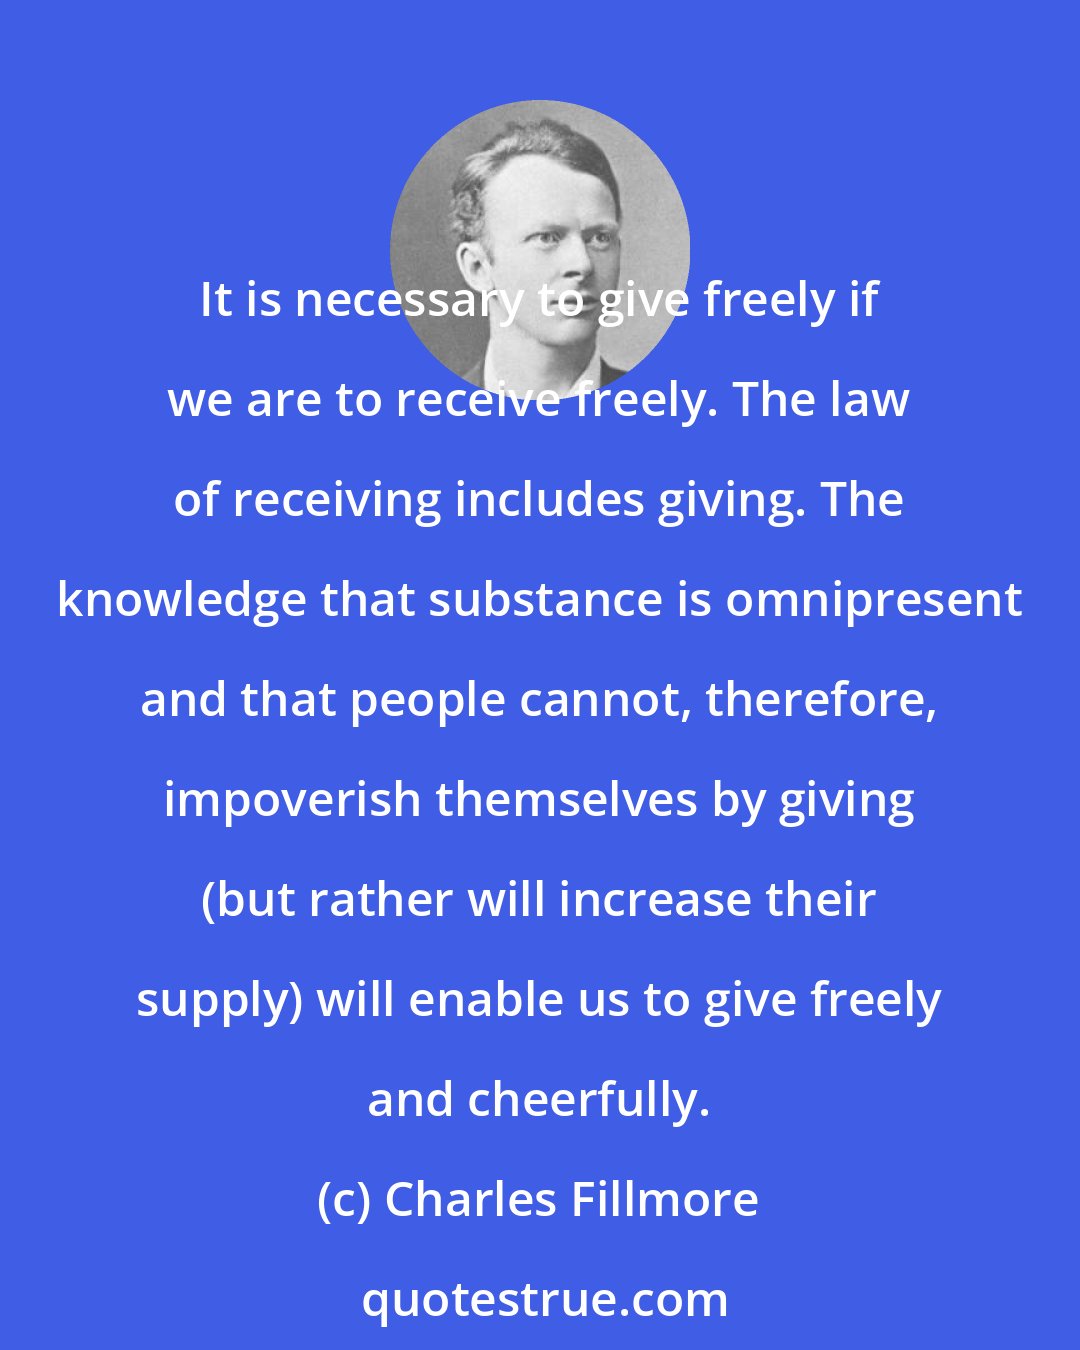 Charles Fillmore: It is necessary to give freely if we are to receive freely. The law of receiving includes giving. The knowledge that substance is omnipresent and that people cannot, therefore, impoverish themselves by giving (but rather will increase their supply) will enable us to give freely and cheerfully.